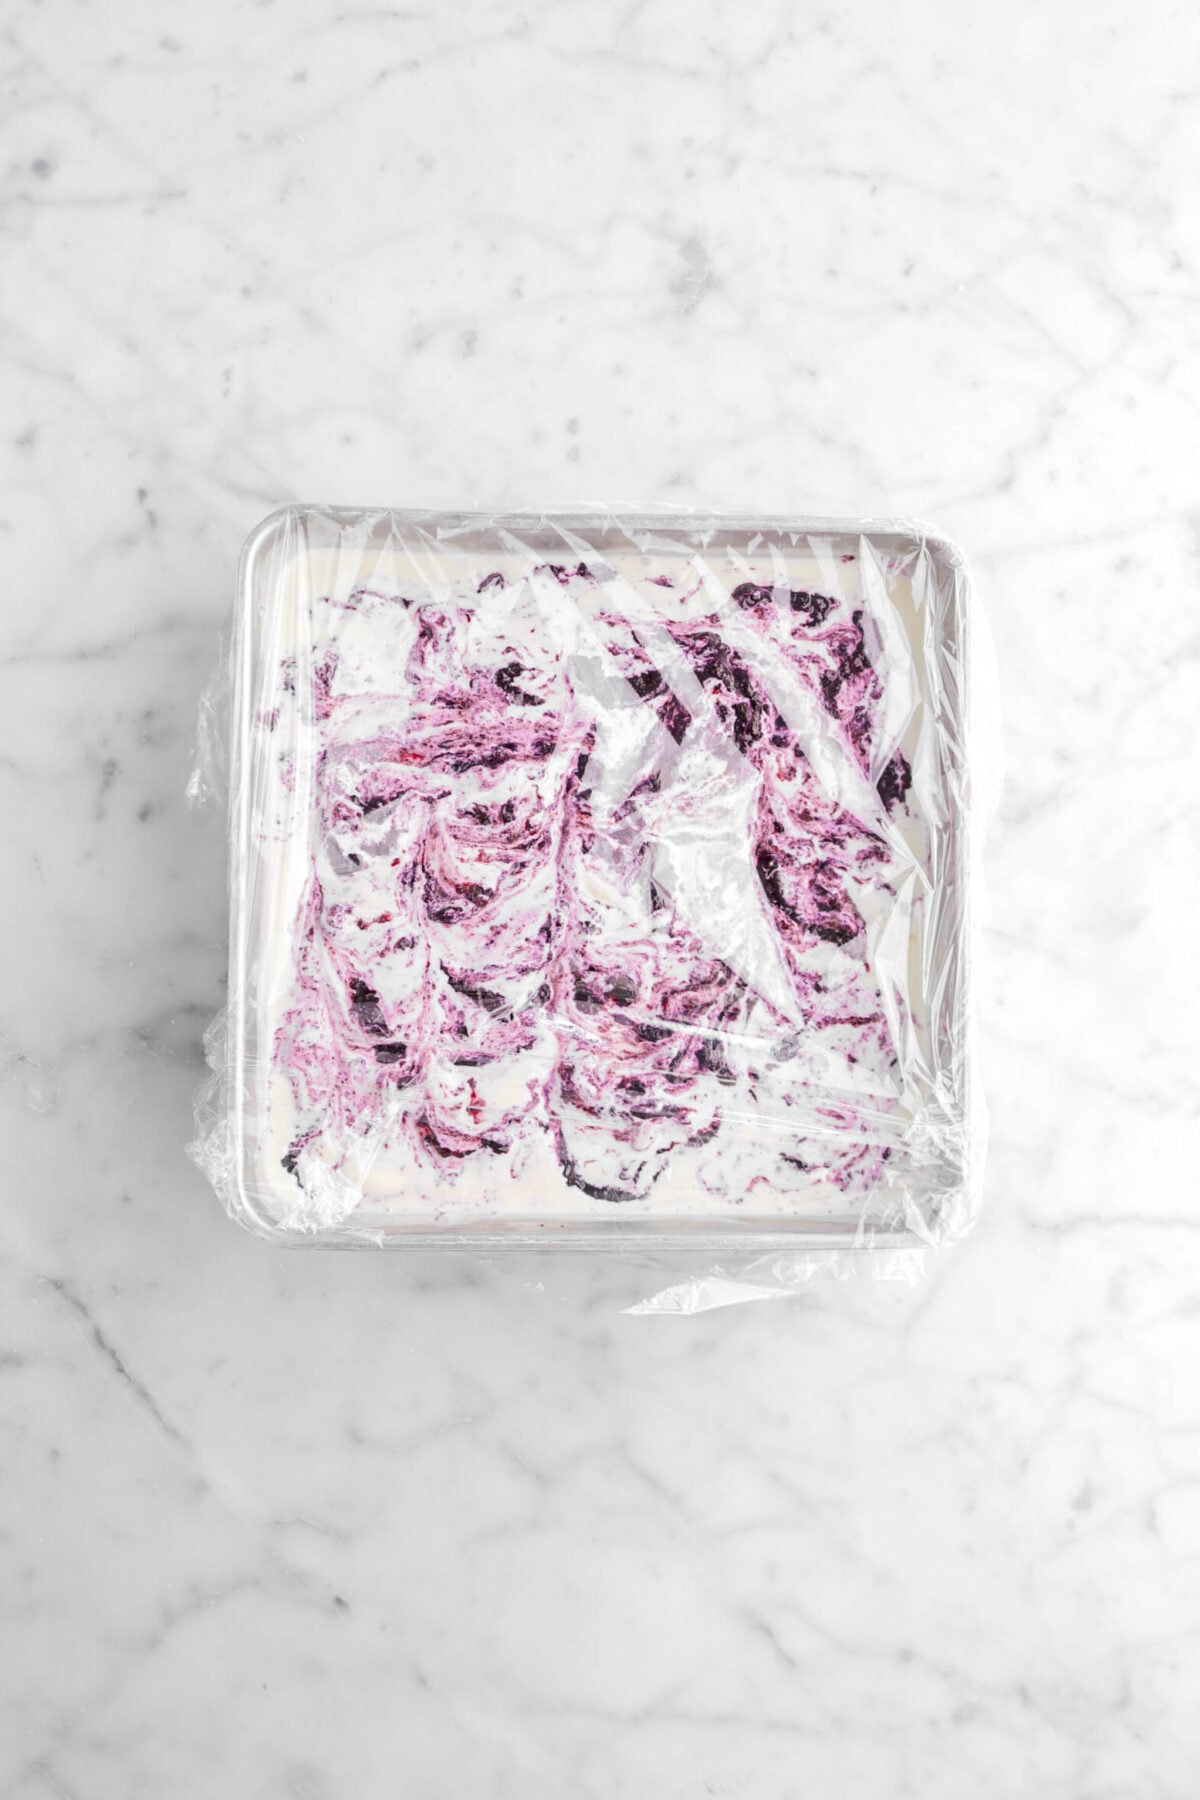 blueberry cheesecake ice cream covered with plastic wrap on marble surface